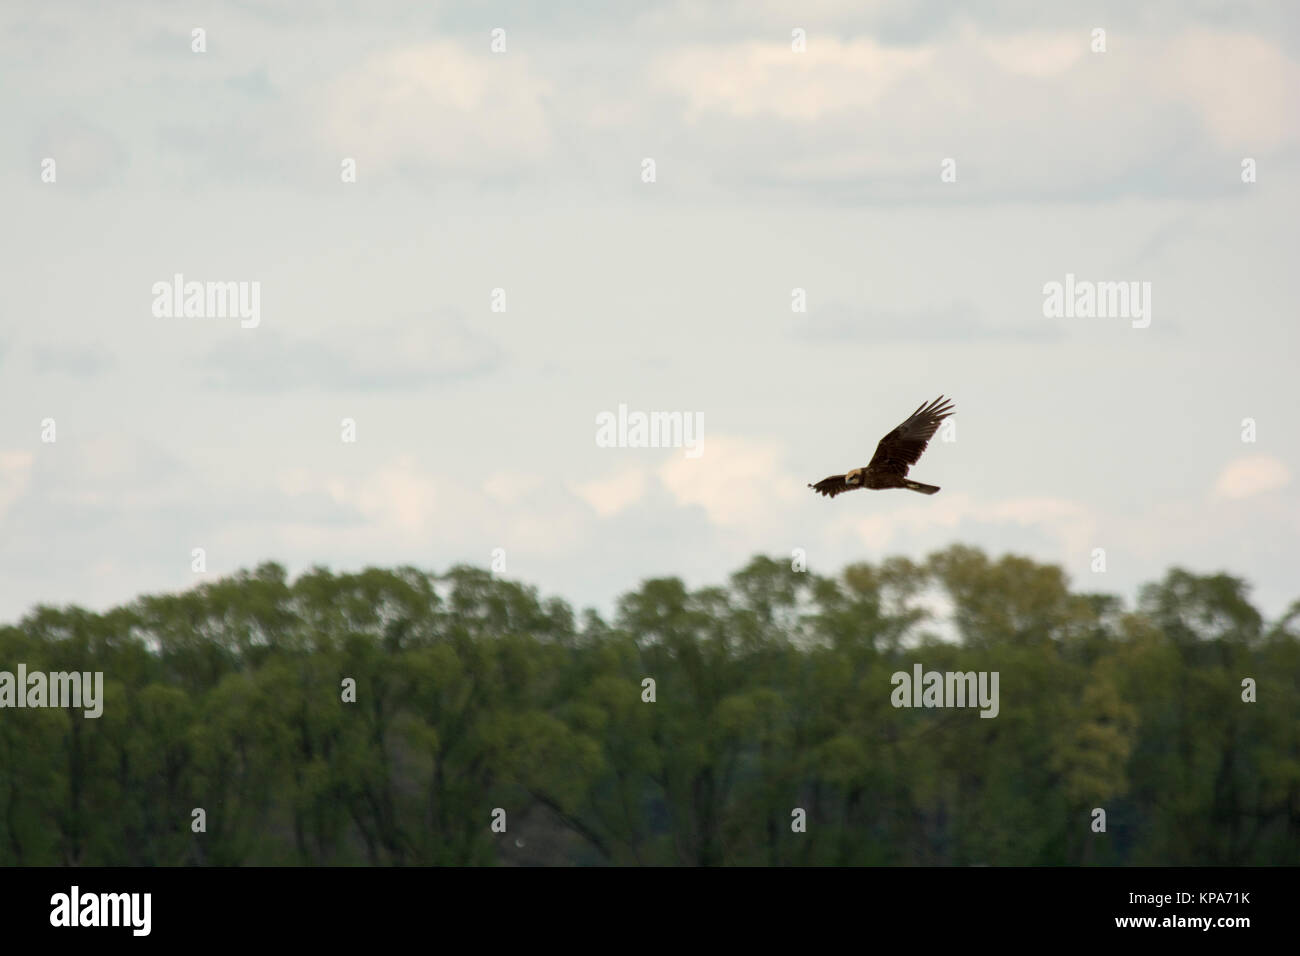 Western Marsh Harrier flying over Rietzer See (Lake Rietz), a nature reserve near the town of Brandenburg in Northeastern Germany Stock Photo